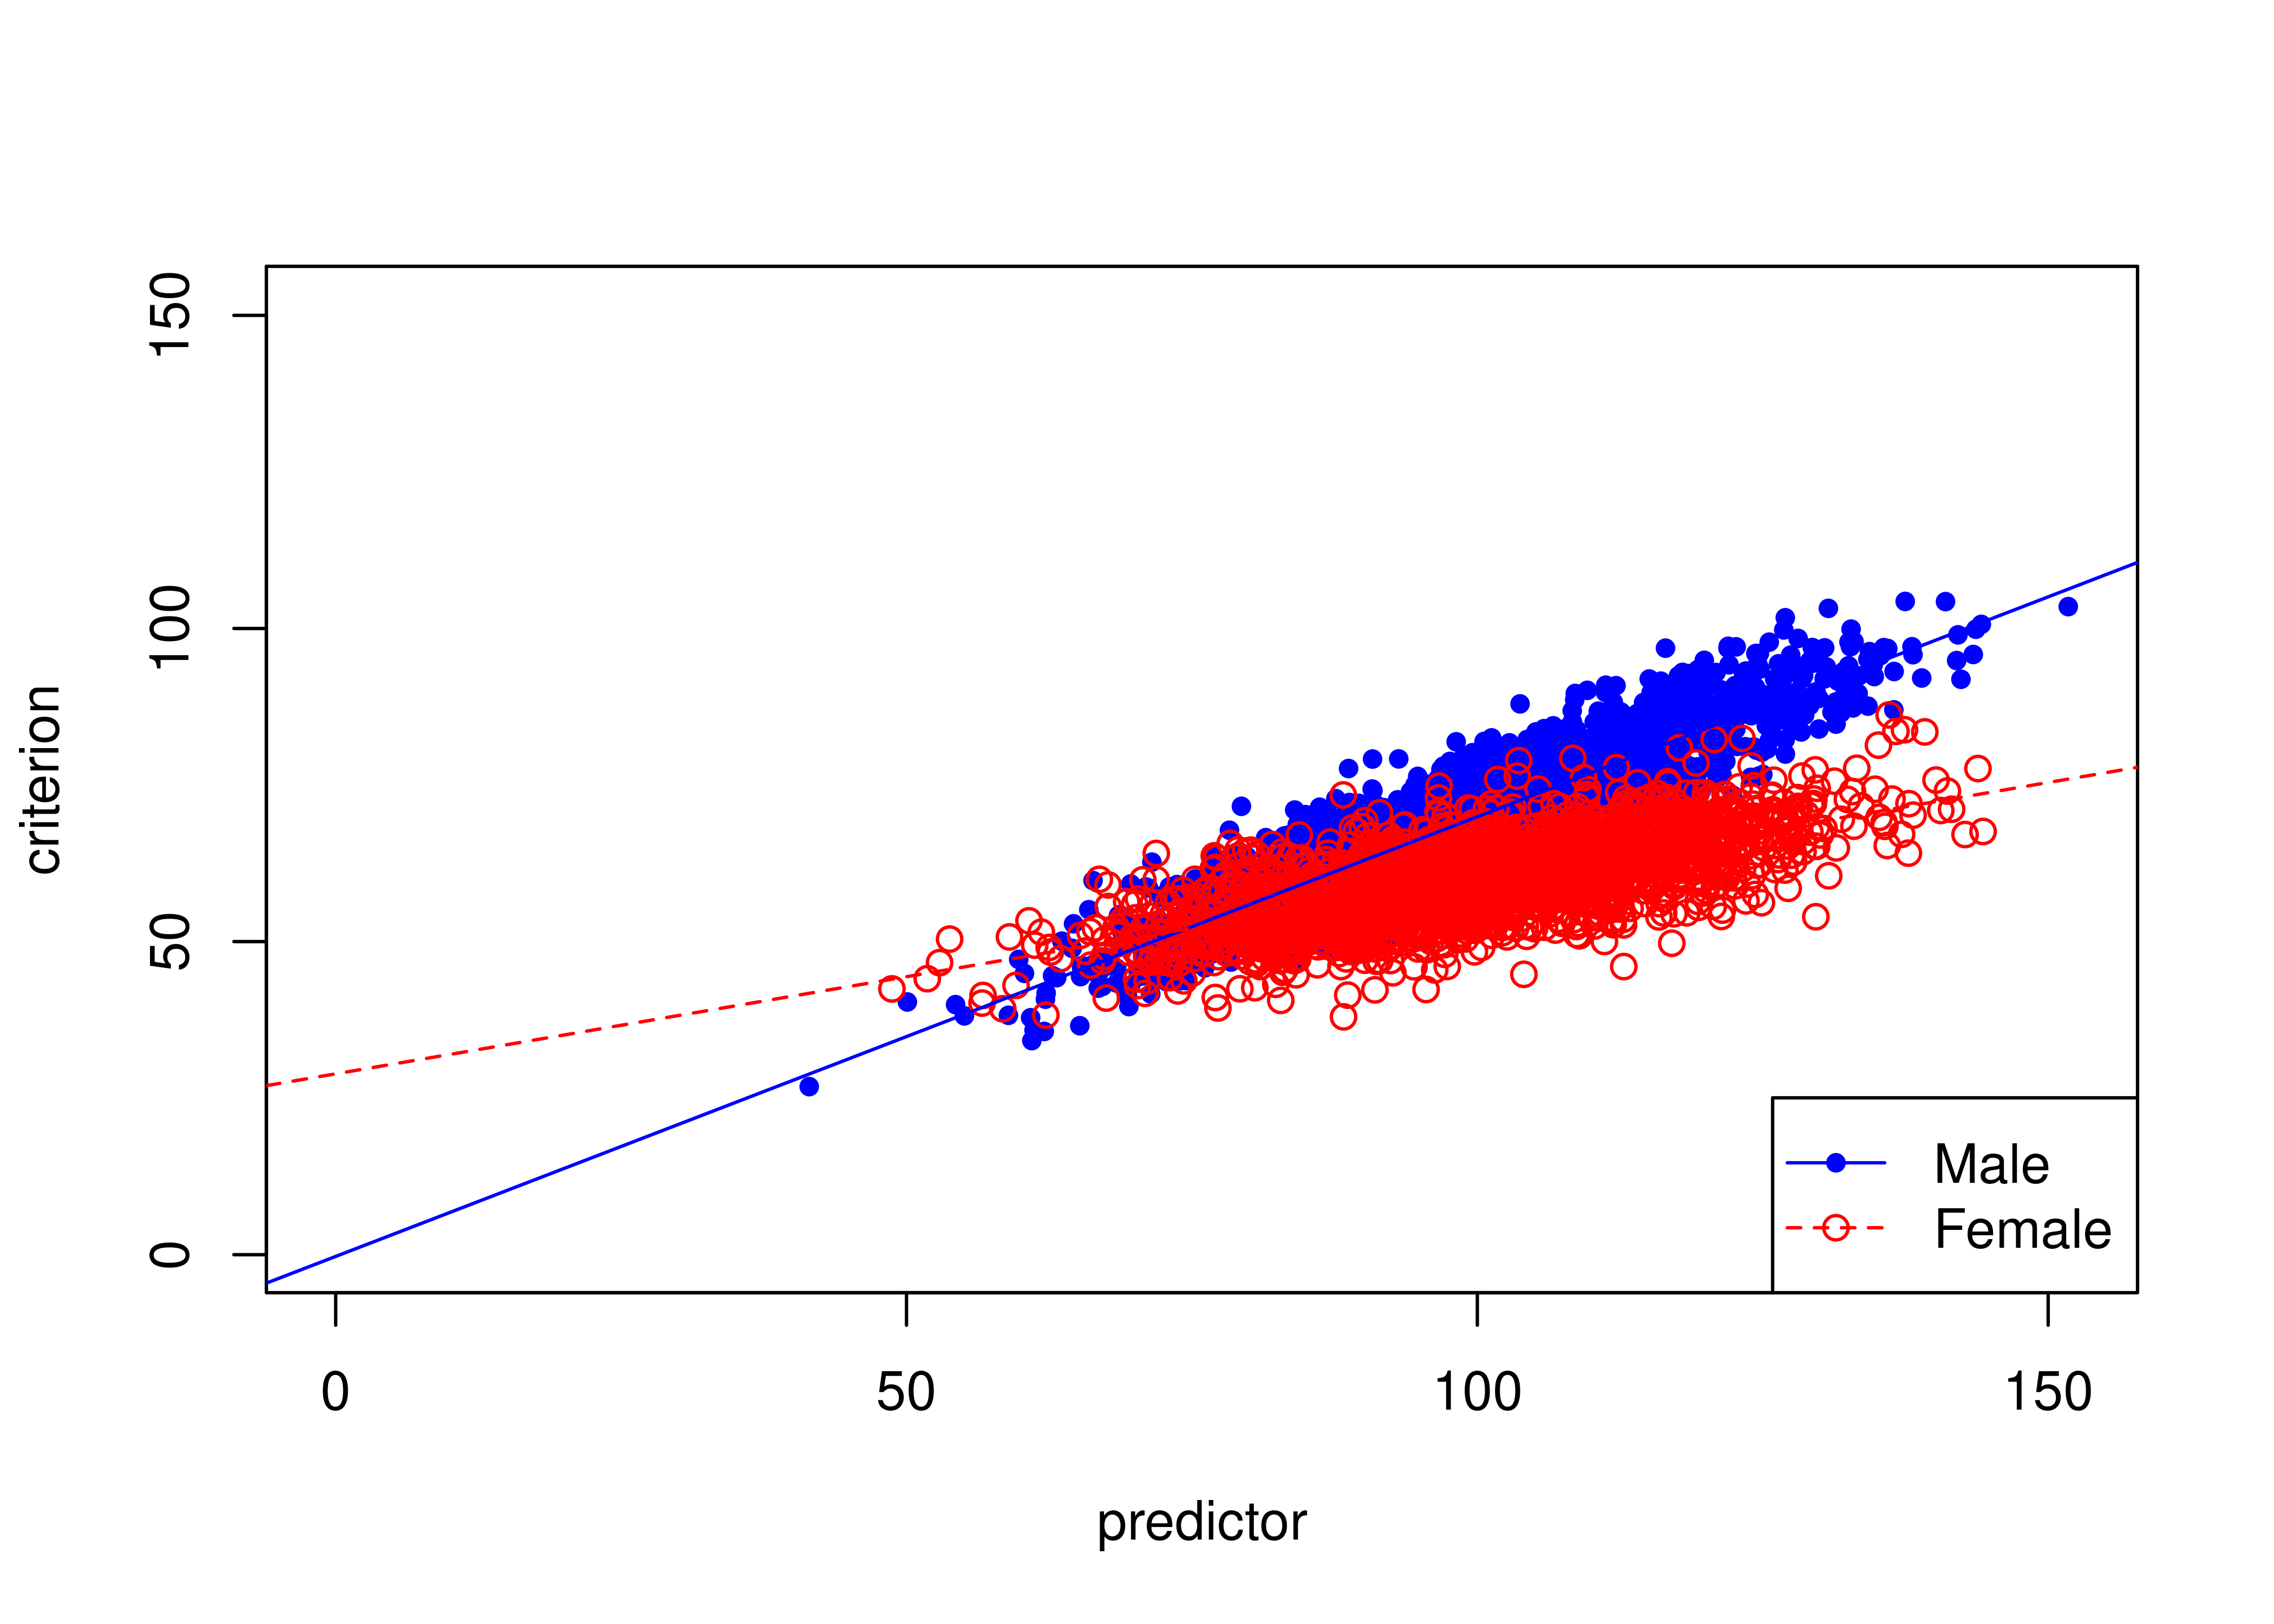 Example of Intercept And Slope Bias in Prediction (Different Intercepts and Slopes Between Males and Females).